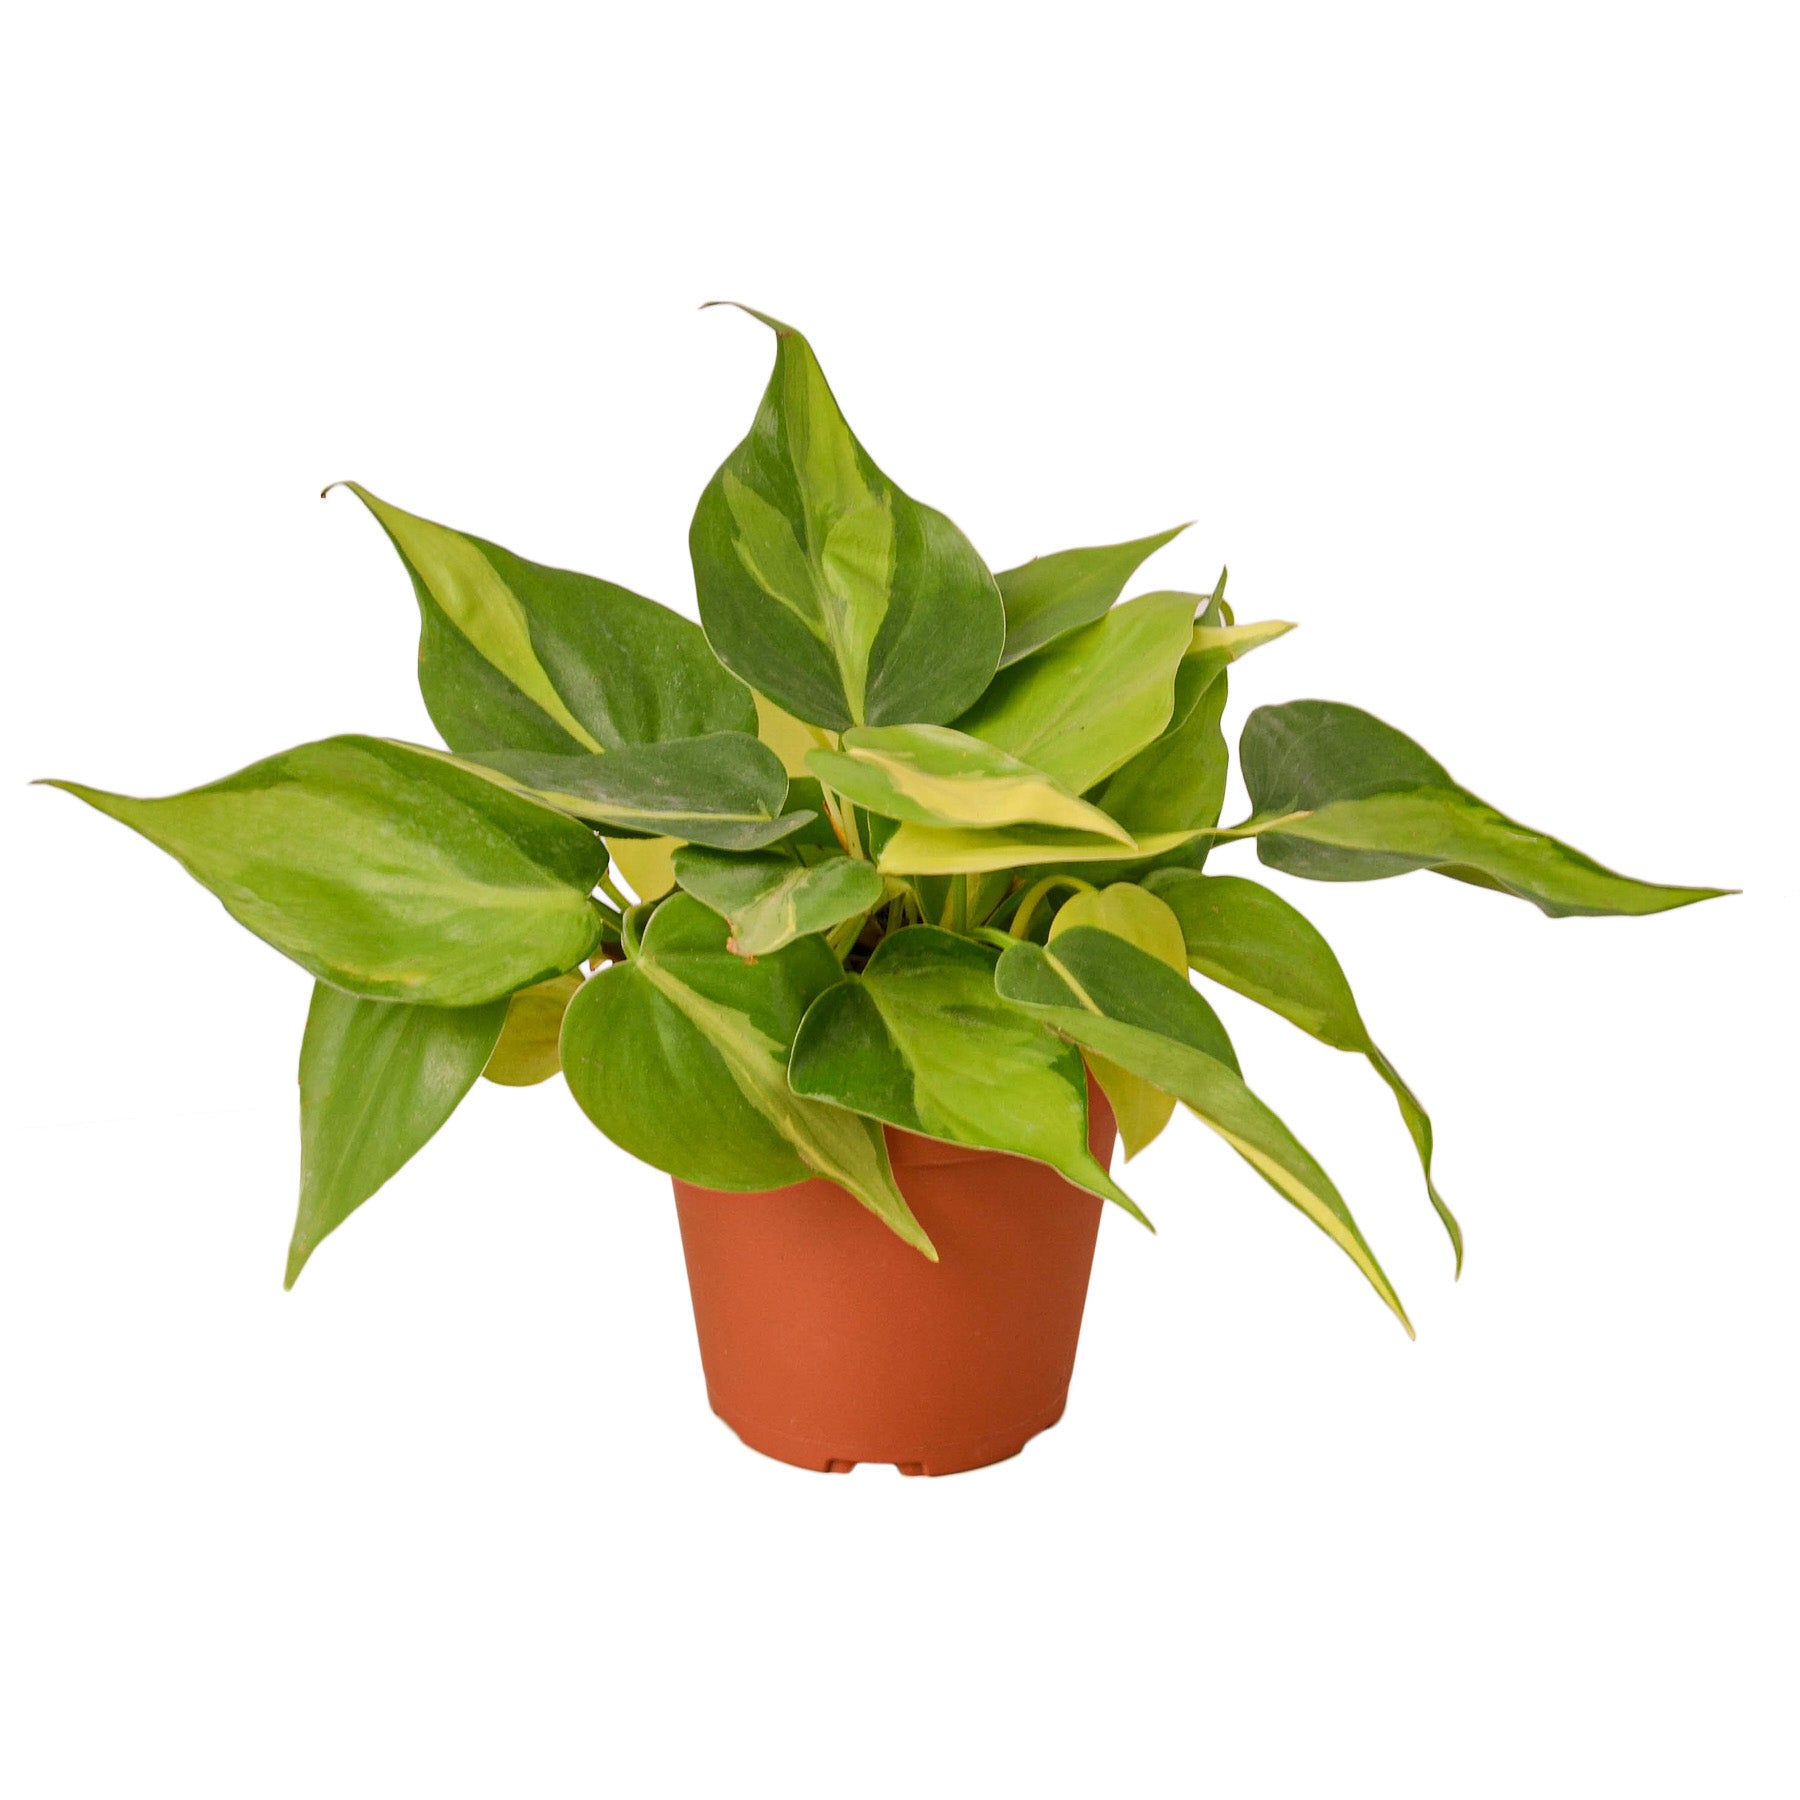 A potted plant with green leaves on a white background available at a nearby nursery.